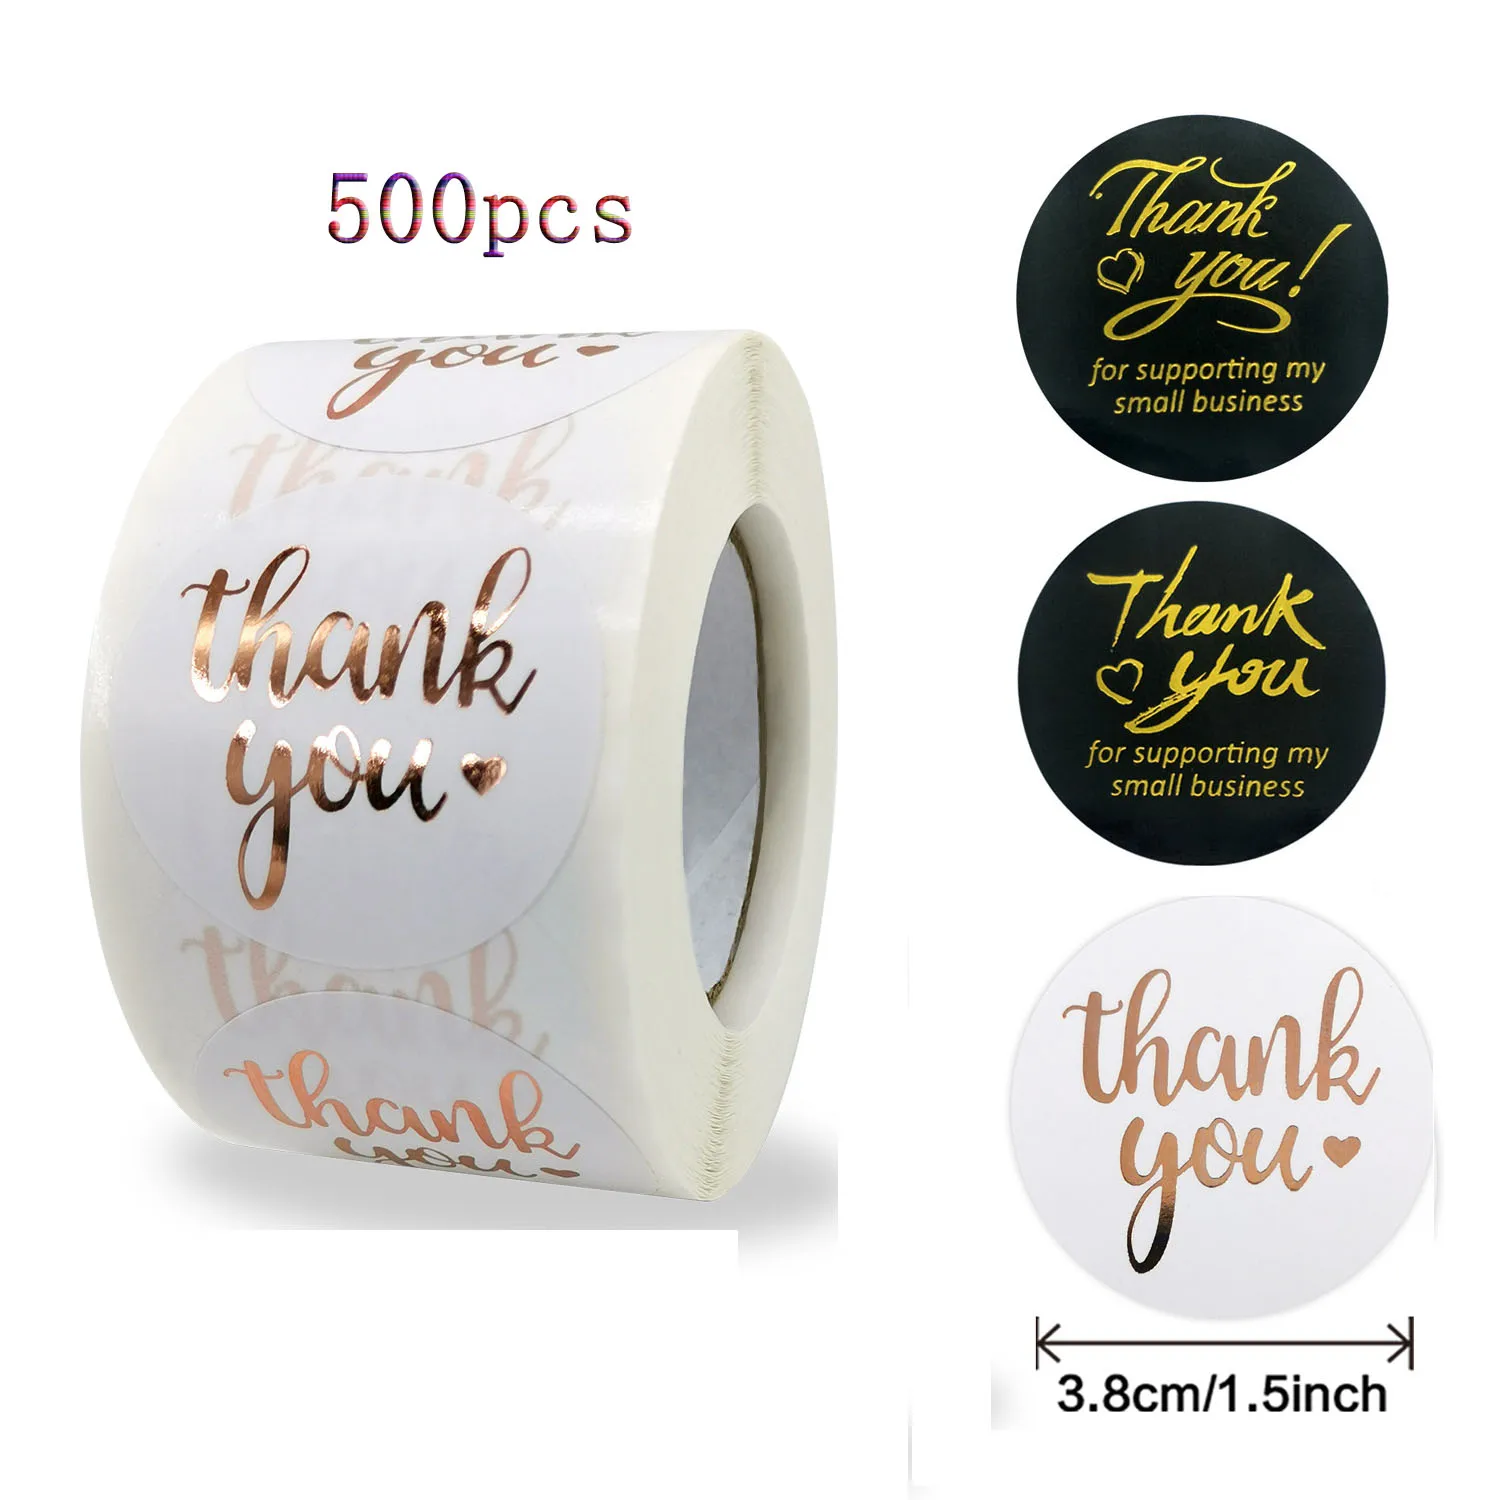 

500Pcs Roll 3.8CM Thank You Scrapbooking Stickers Gift Stickers DIY Present Envelope Diary Invitation Letter Sealing Labels Tags